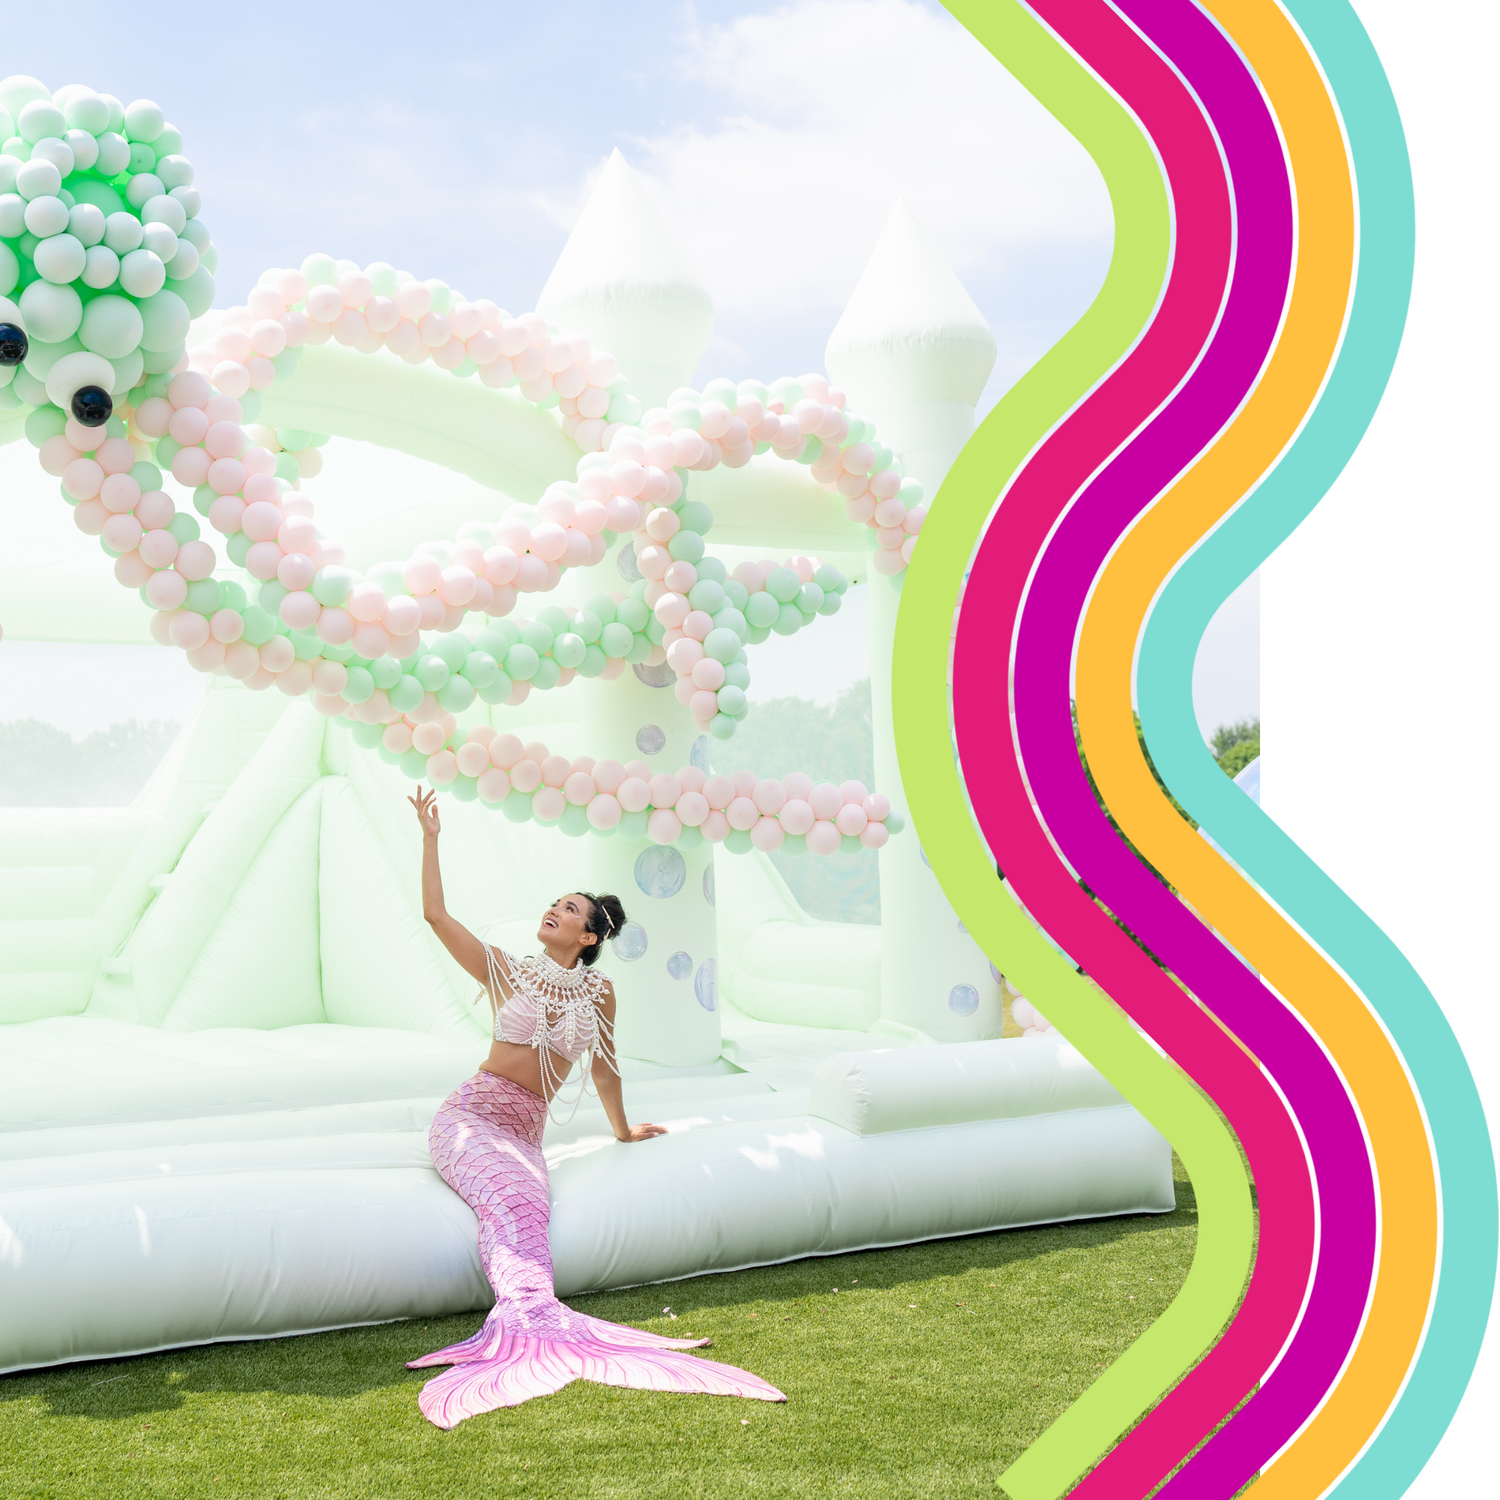 DFW Confetti Bounce, Dallas Fort Worth Metroplex premiere white bounce house, bubble house and event rental company providing party essentials for all needs and sizes.